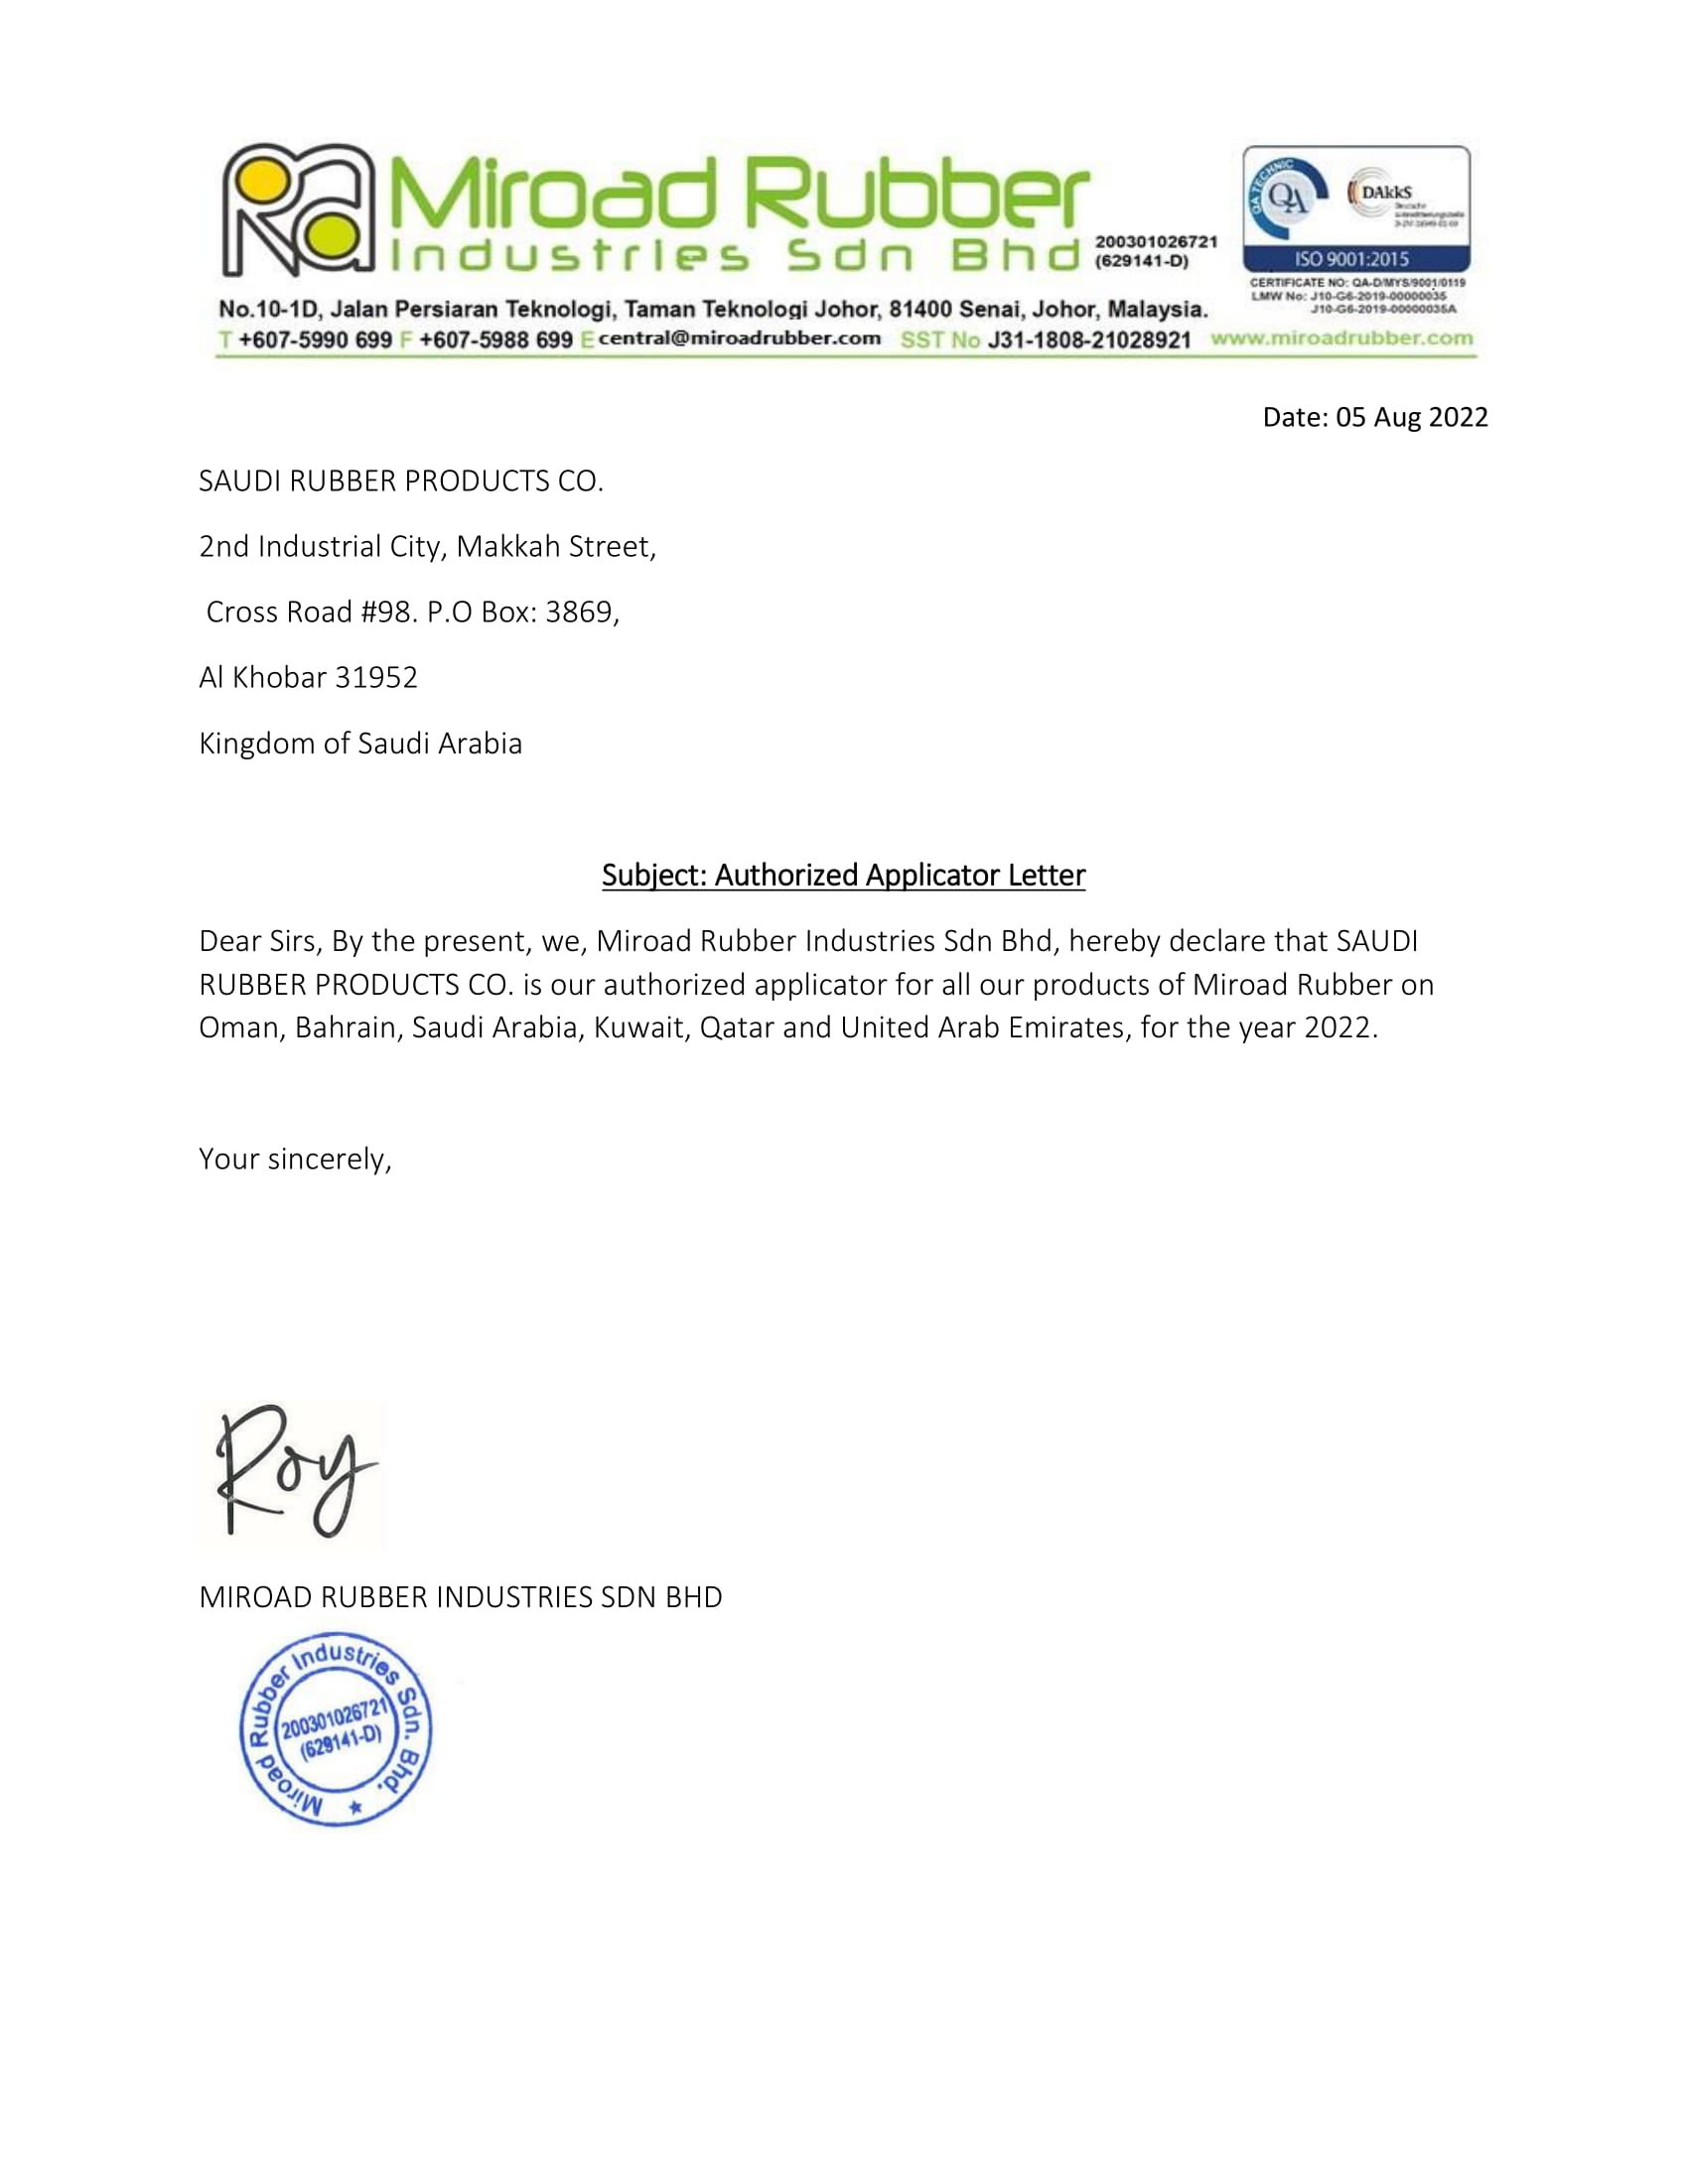 Certificate of Miroad Rubber Industries SDN BHD -A-1